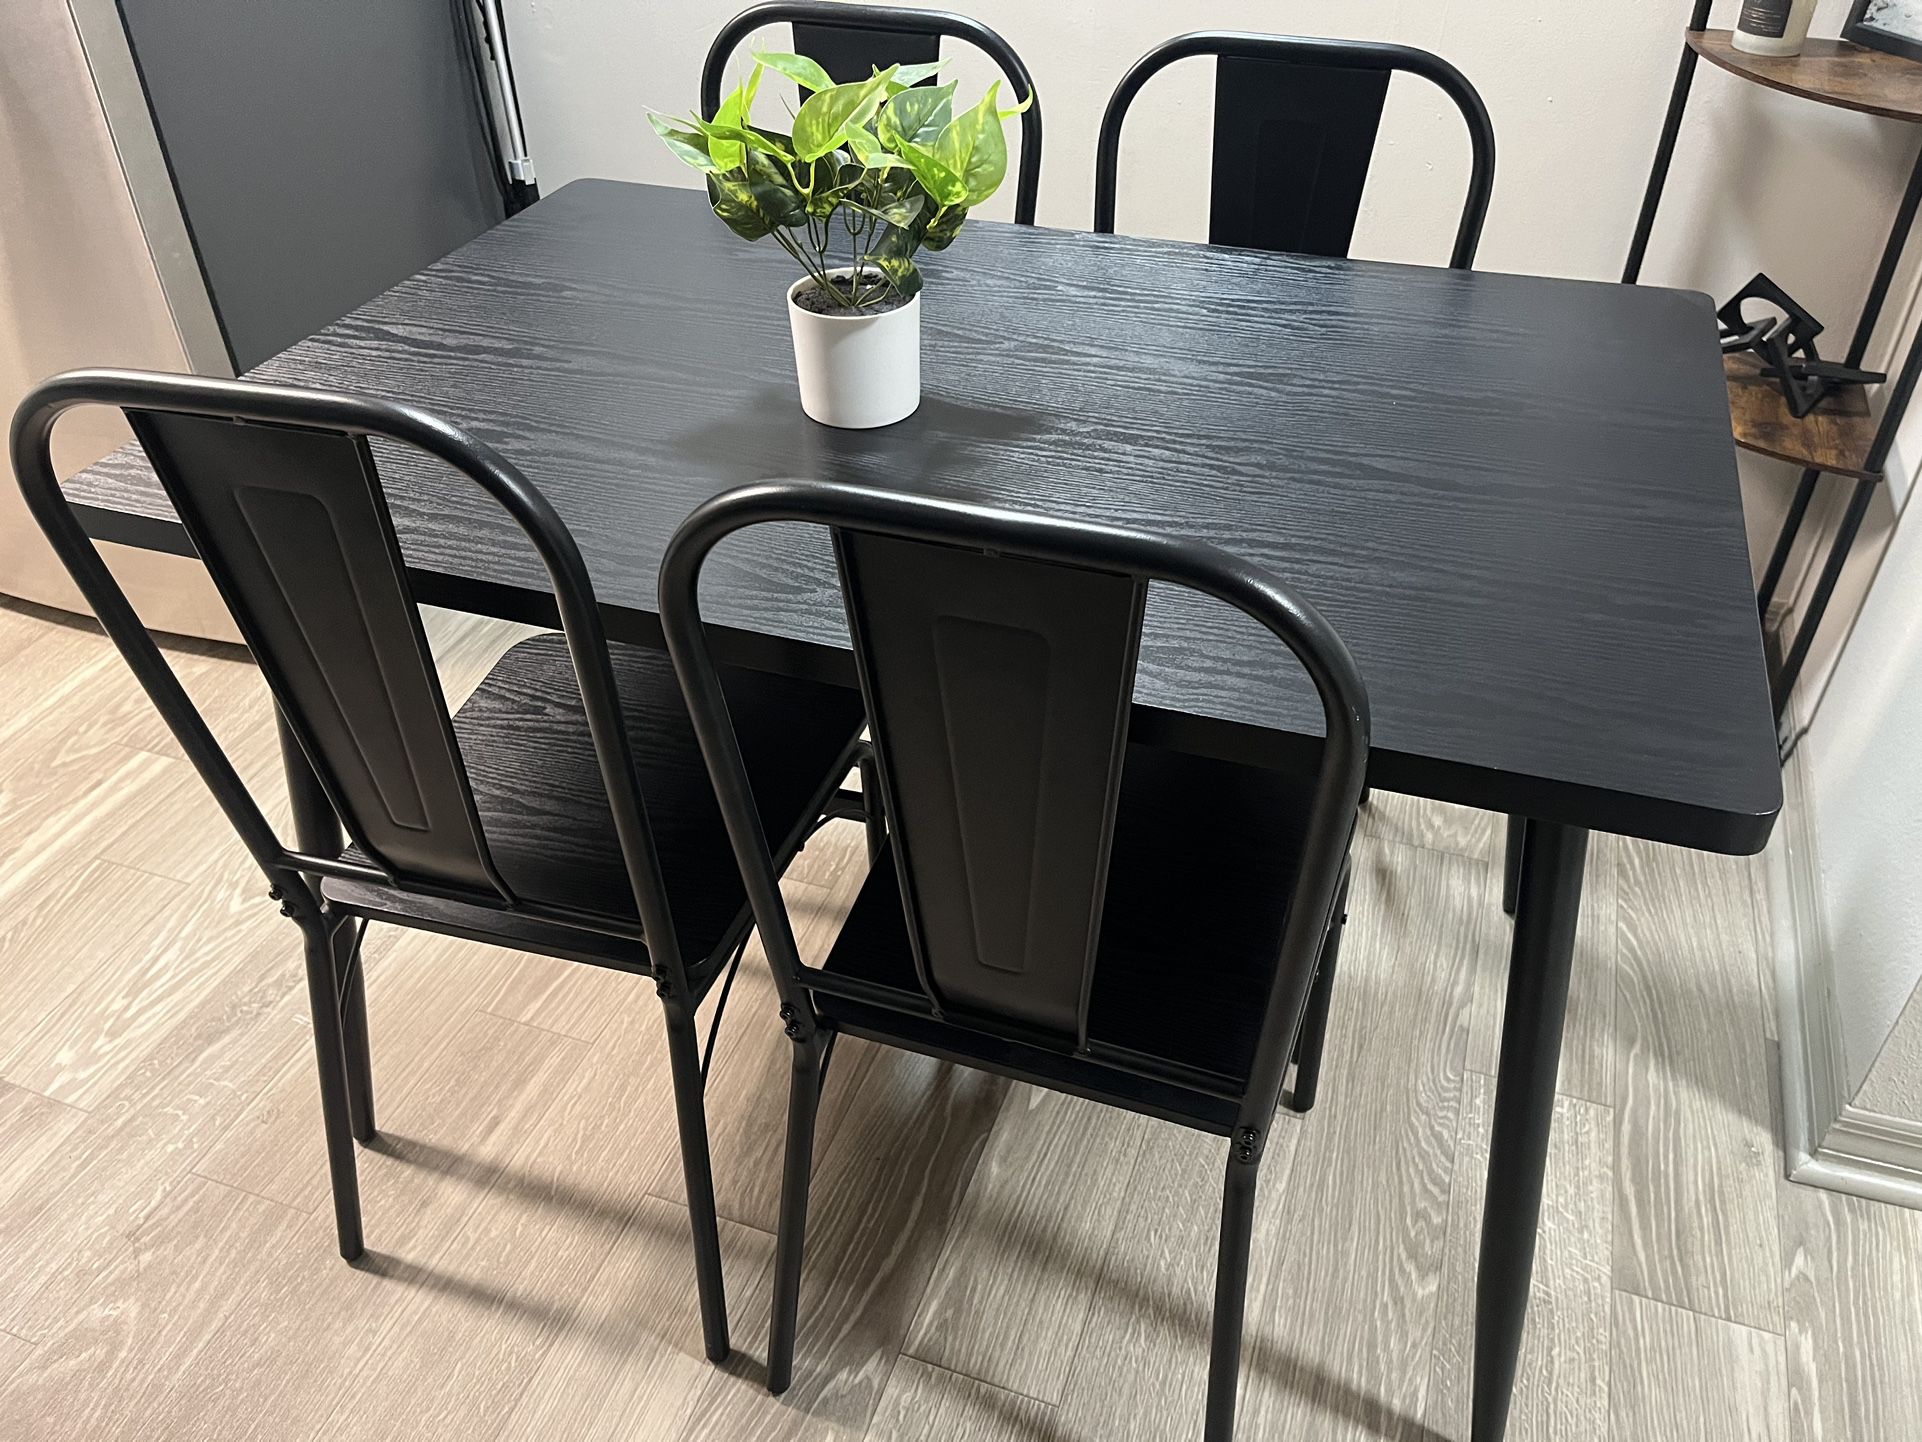 Table With Chairs Set 